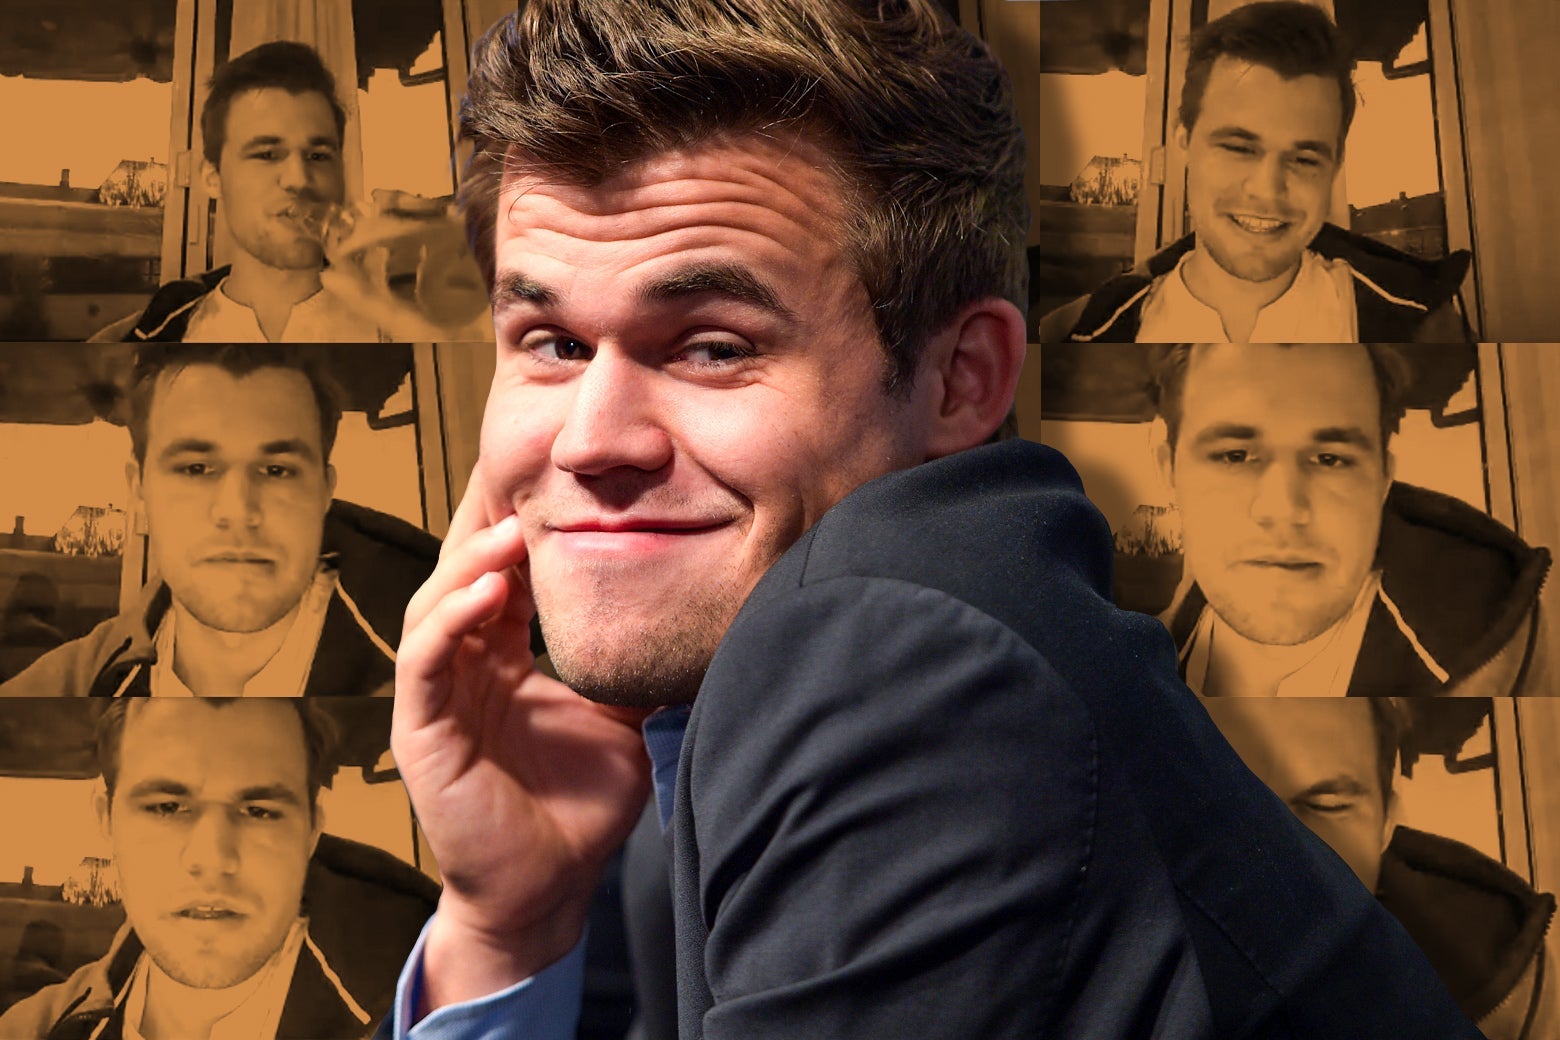 Magnus Carlsen smirks and holds his hand up to his face. Behind him are screenshots of his face from livestreams.